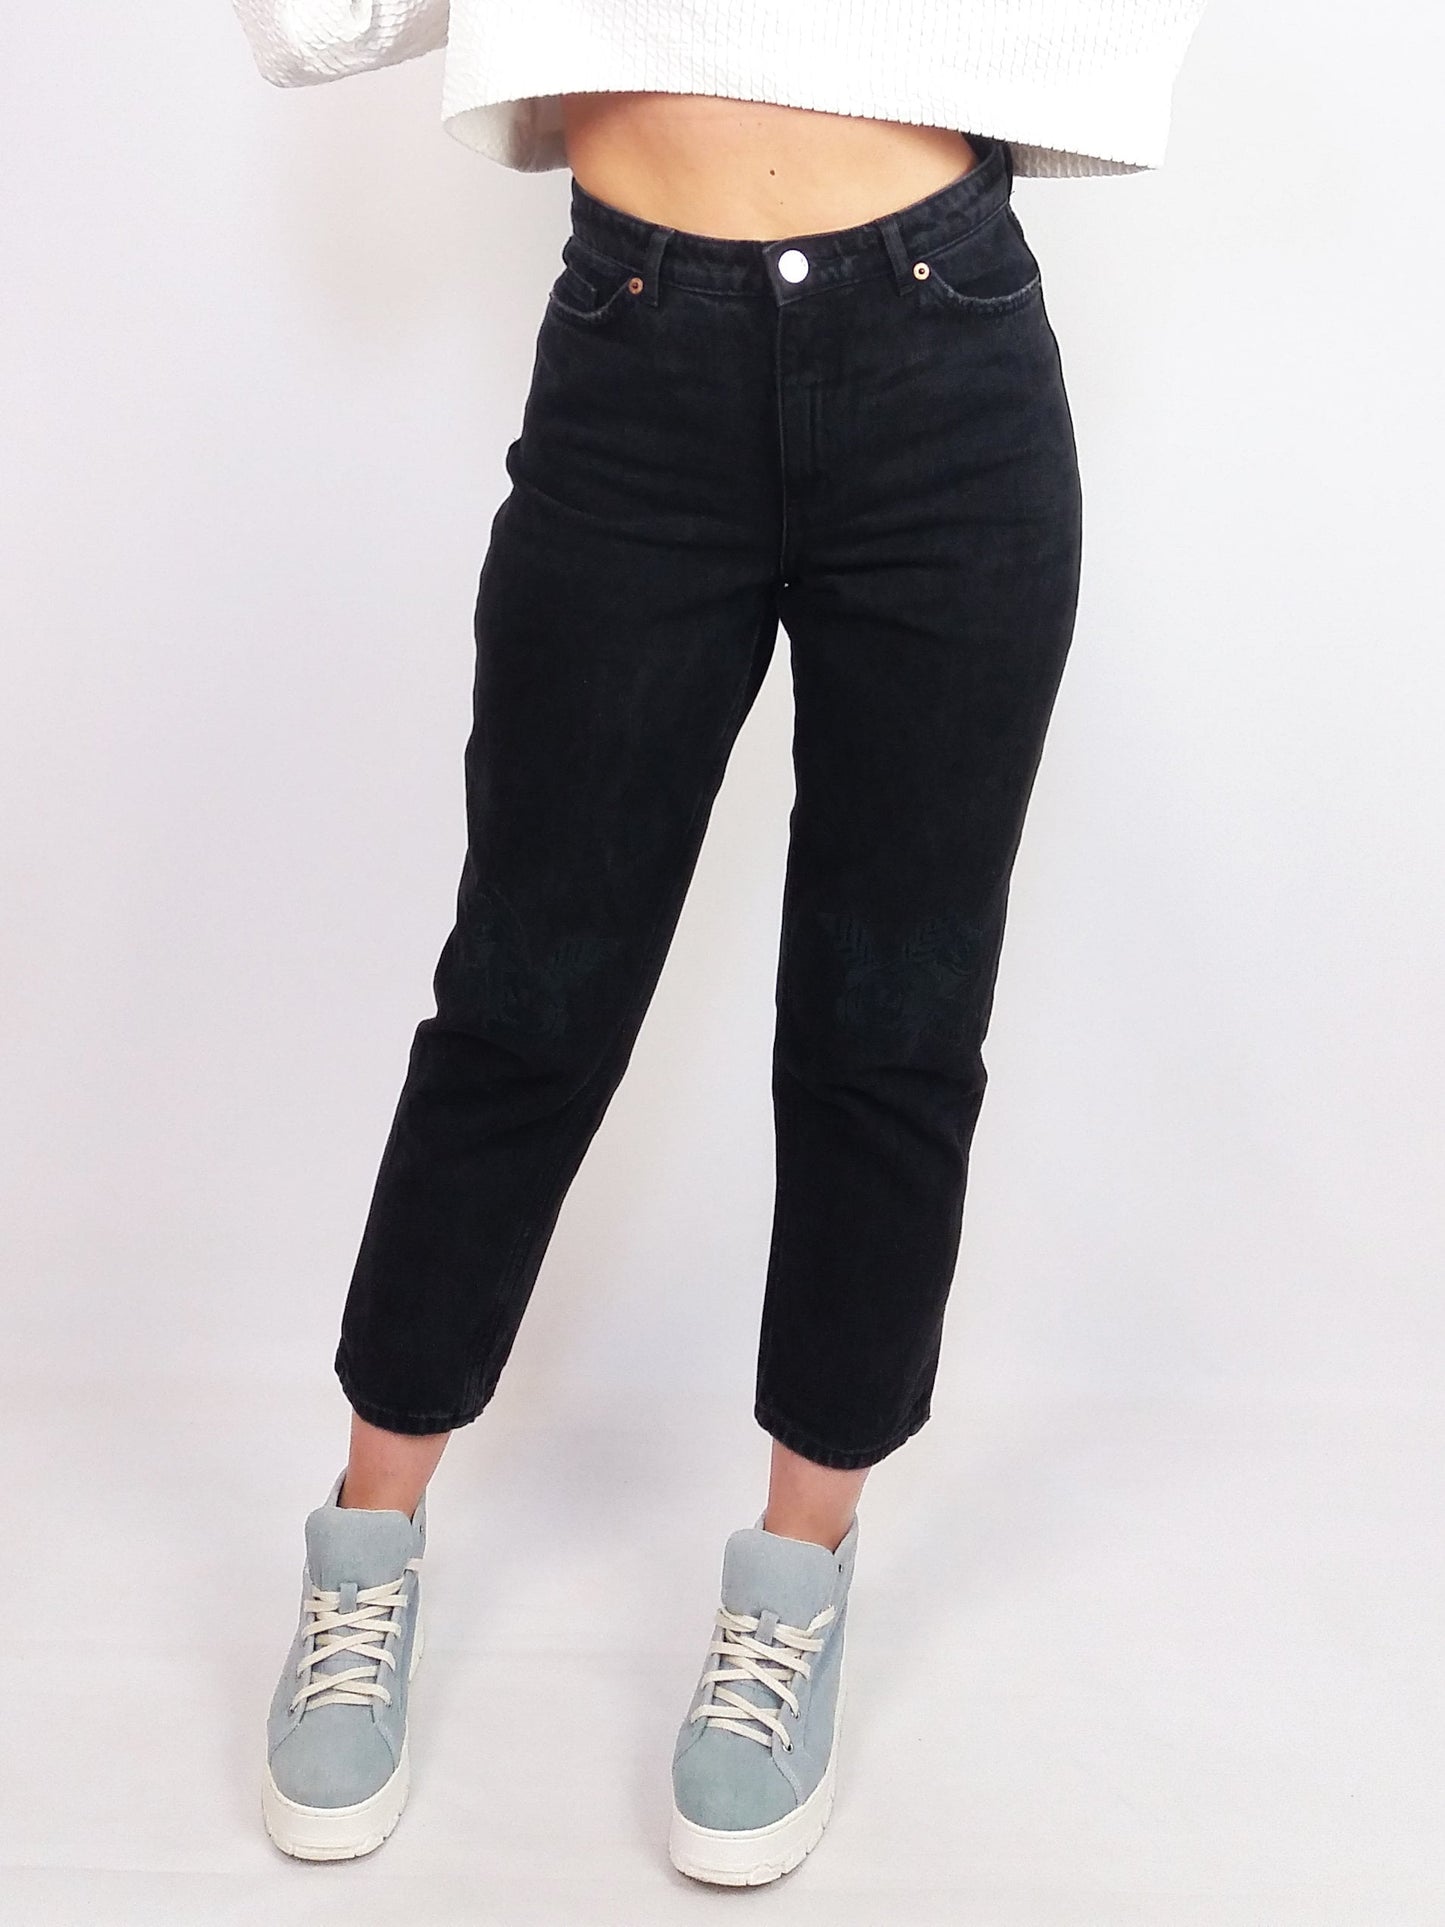 MONKI High Waist Black Mom Jeans Flower Embroidery Patch ~ size 25 - XS-S